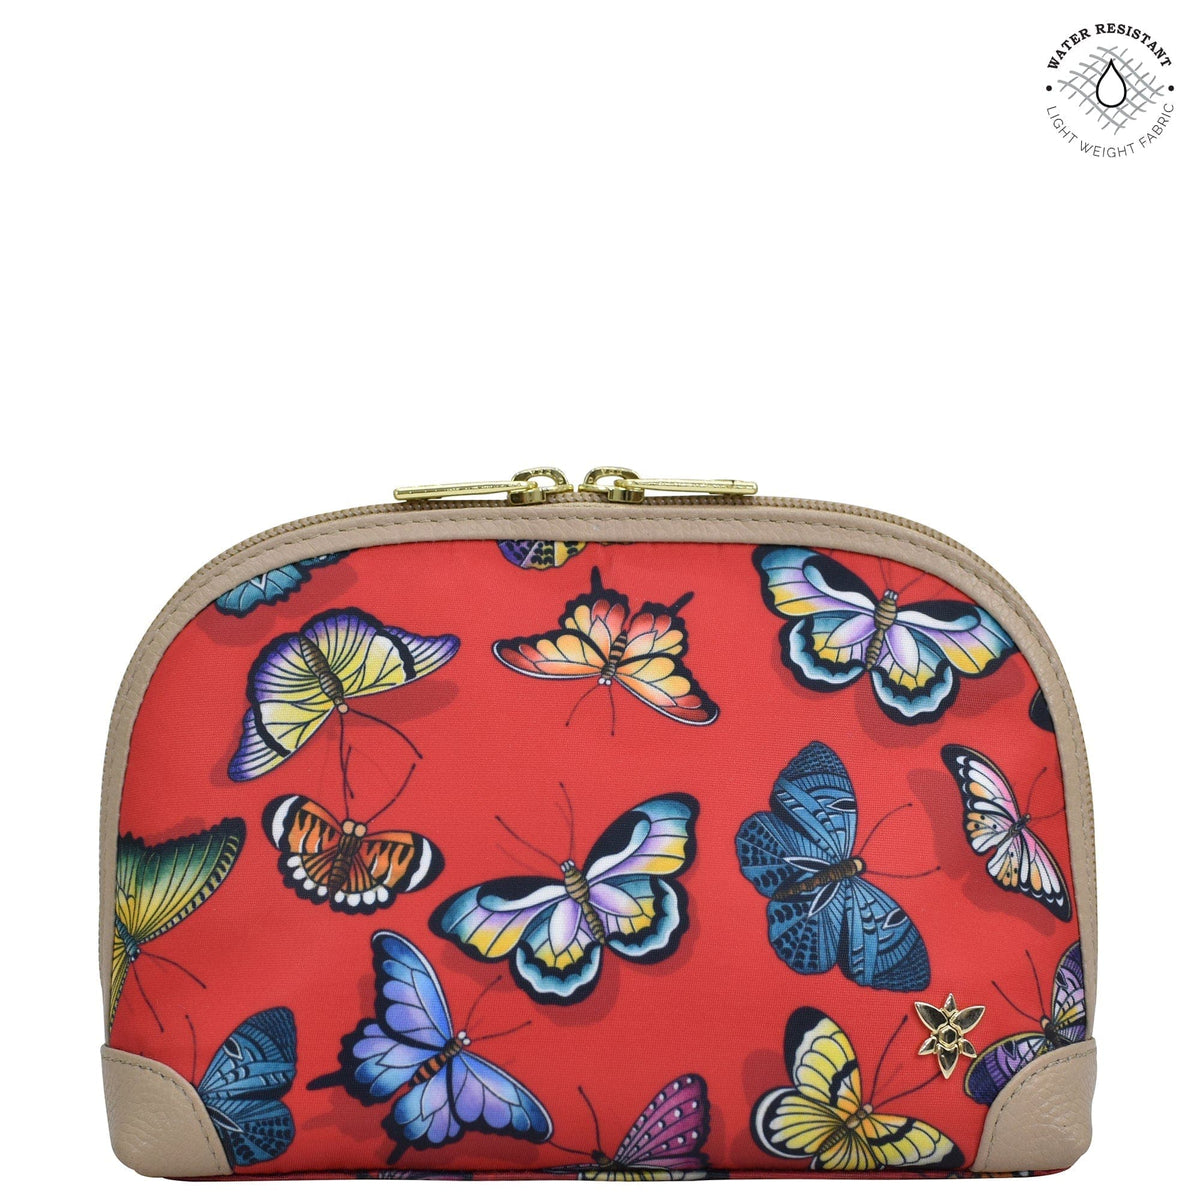 Goed doen Inspiratie straf Fabric with Leather Trim Dome Cosmetic Bag - 13002 – Anuschka